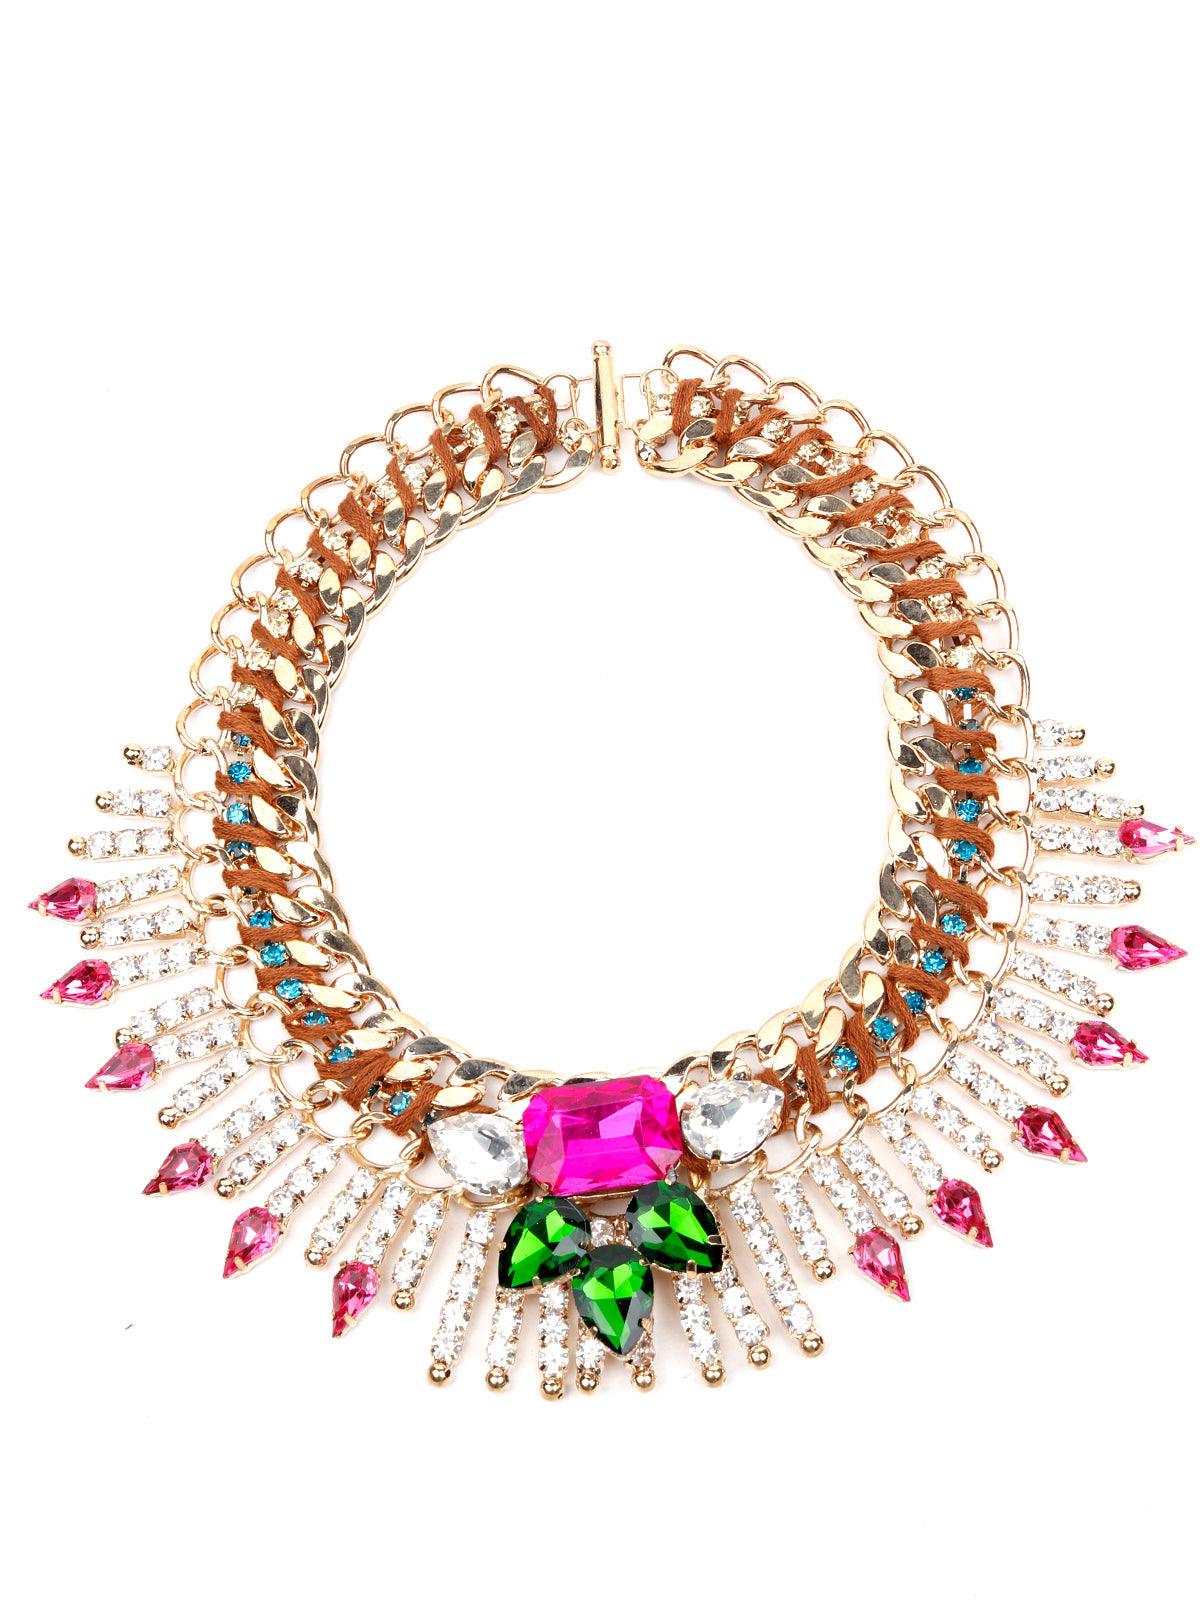 Women's All Rounded Stunning Statement Choker Necklace - Odette